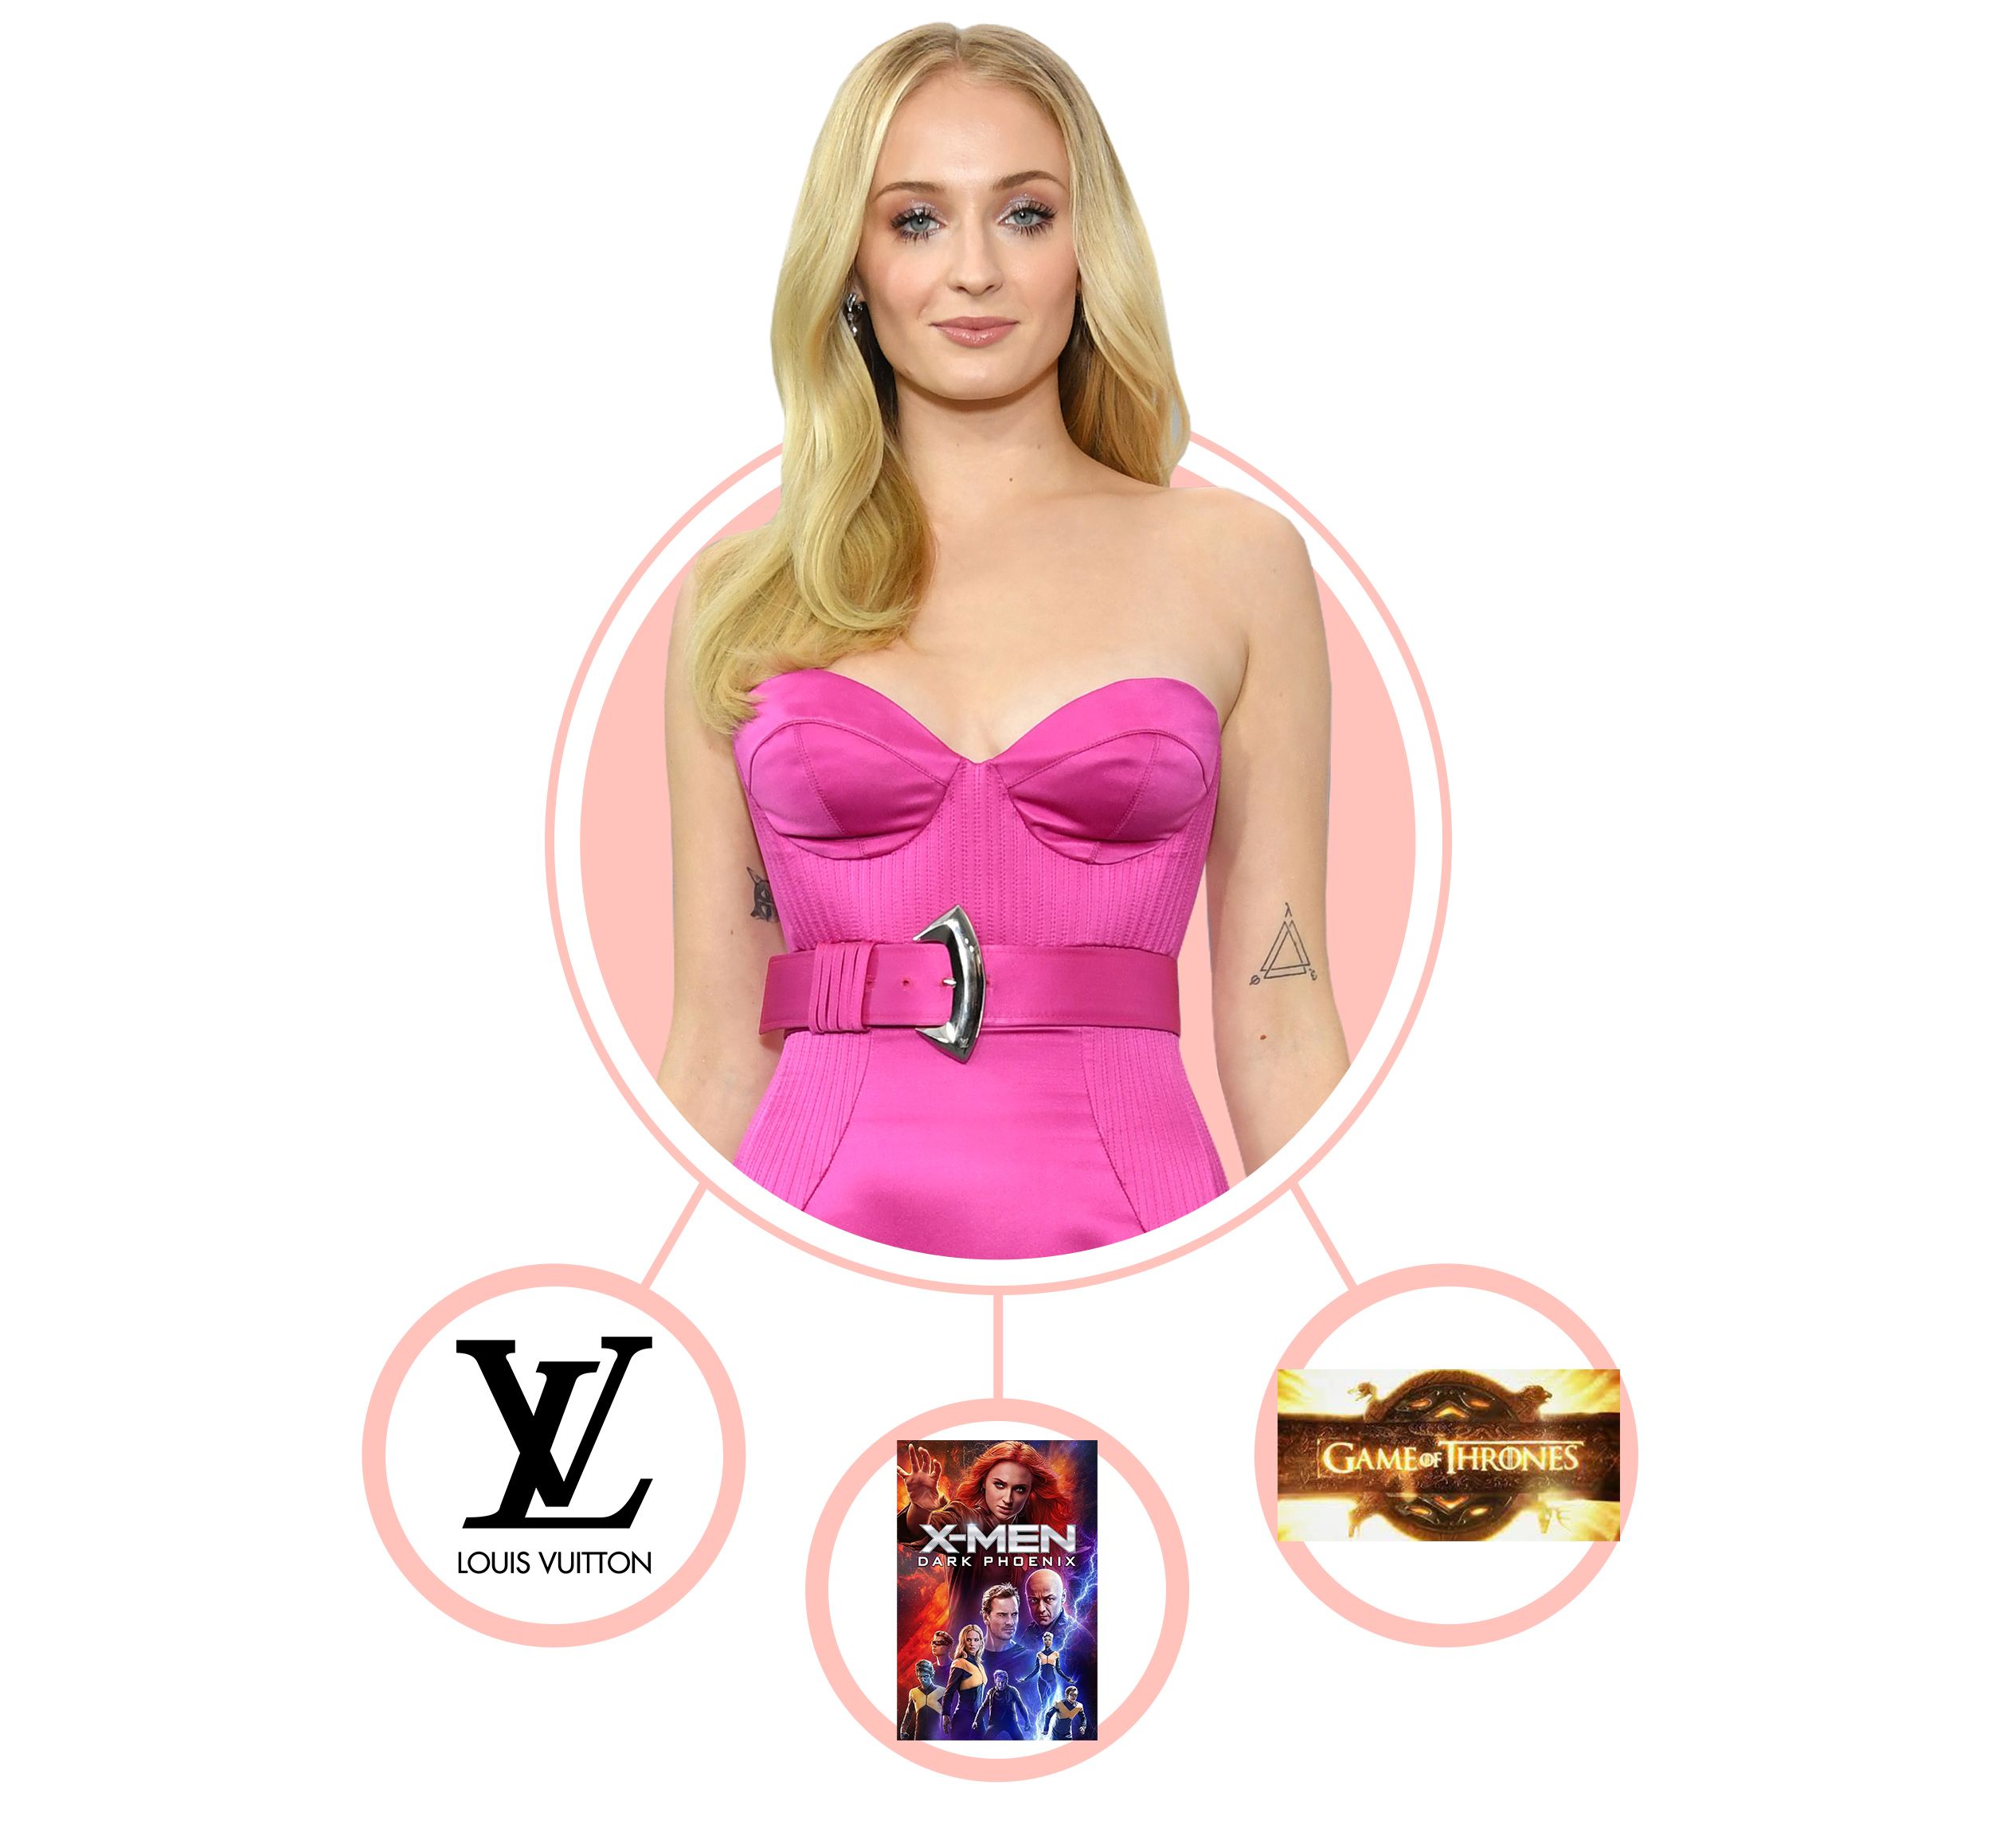 Game of Thrones star Sophie Turner fronts Louis Vuitton smartwatch  promotions in 2019